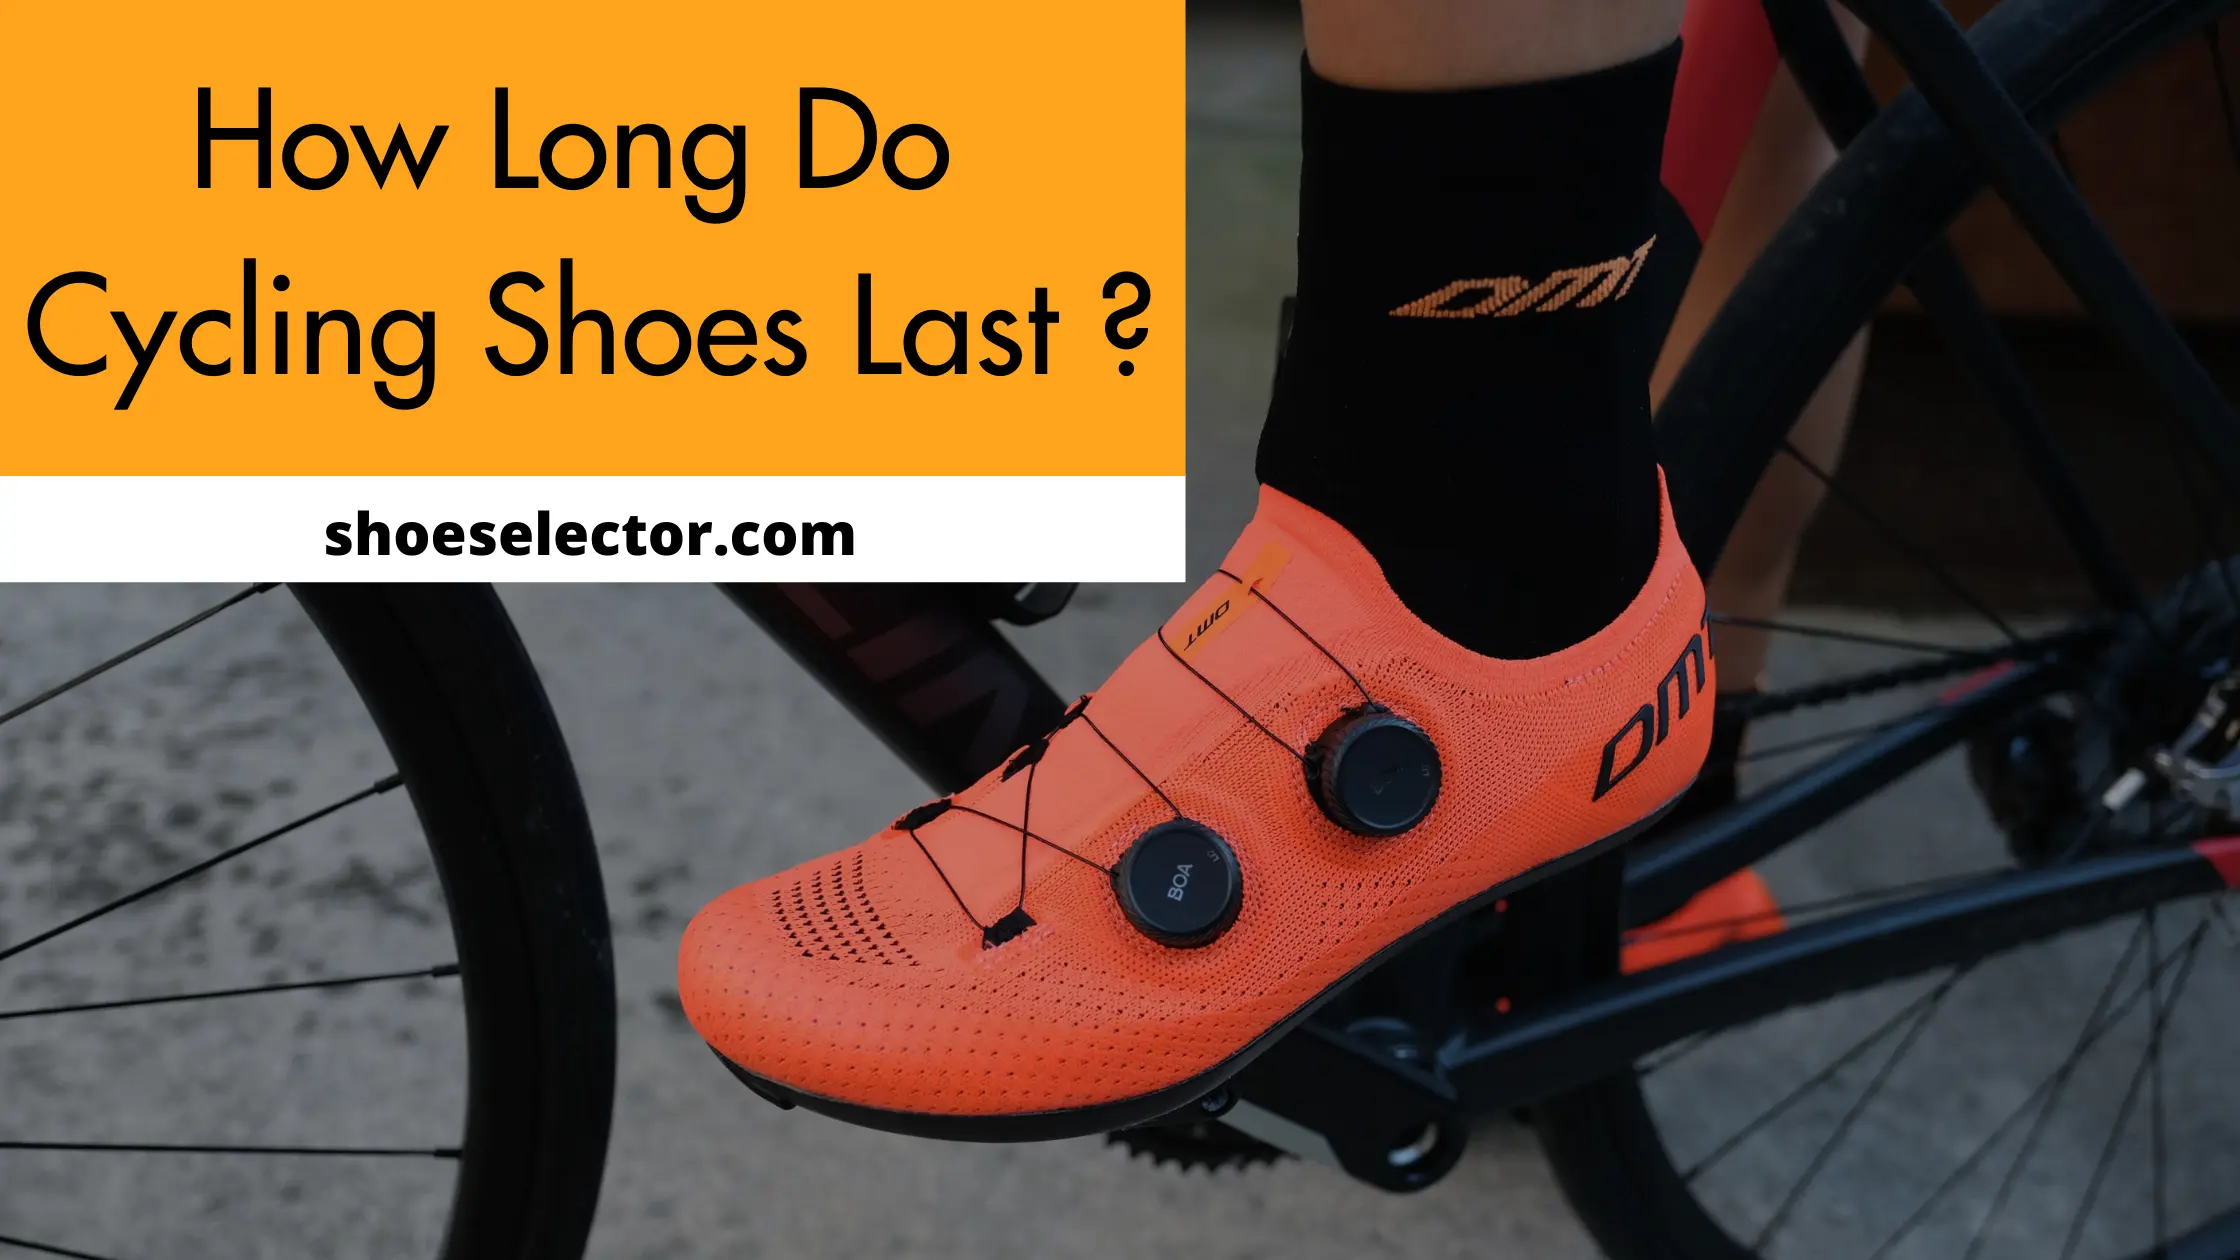 How Long do Cycling Shoes Last? - Comprehensive Guide